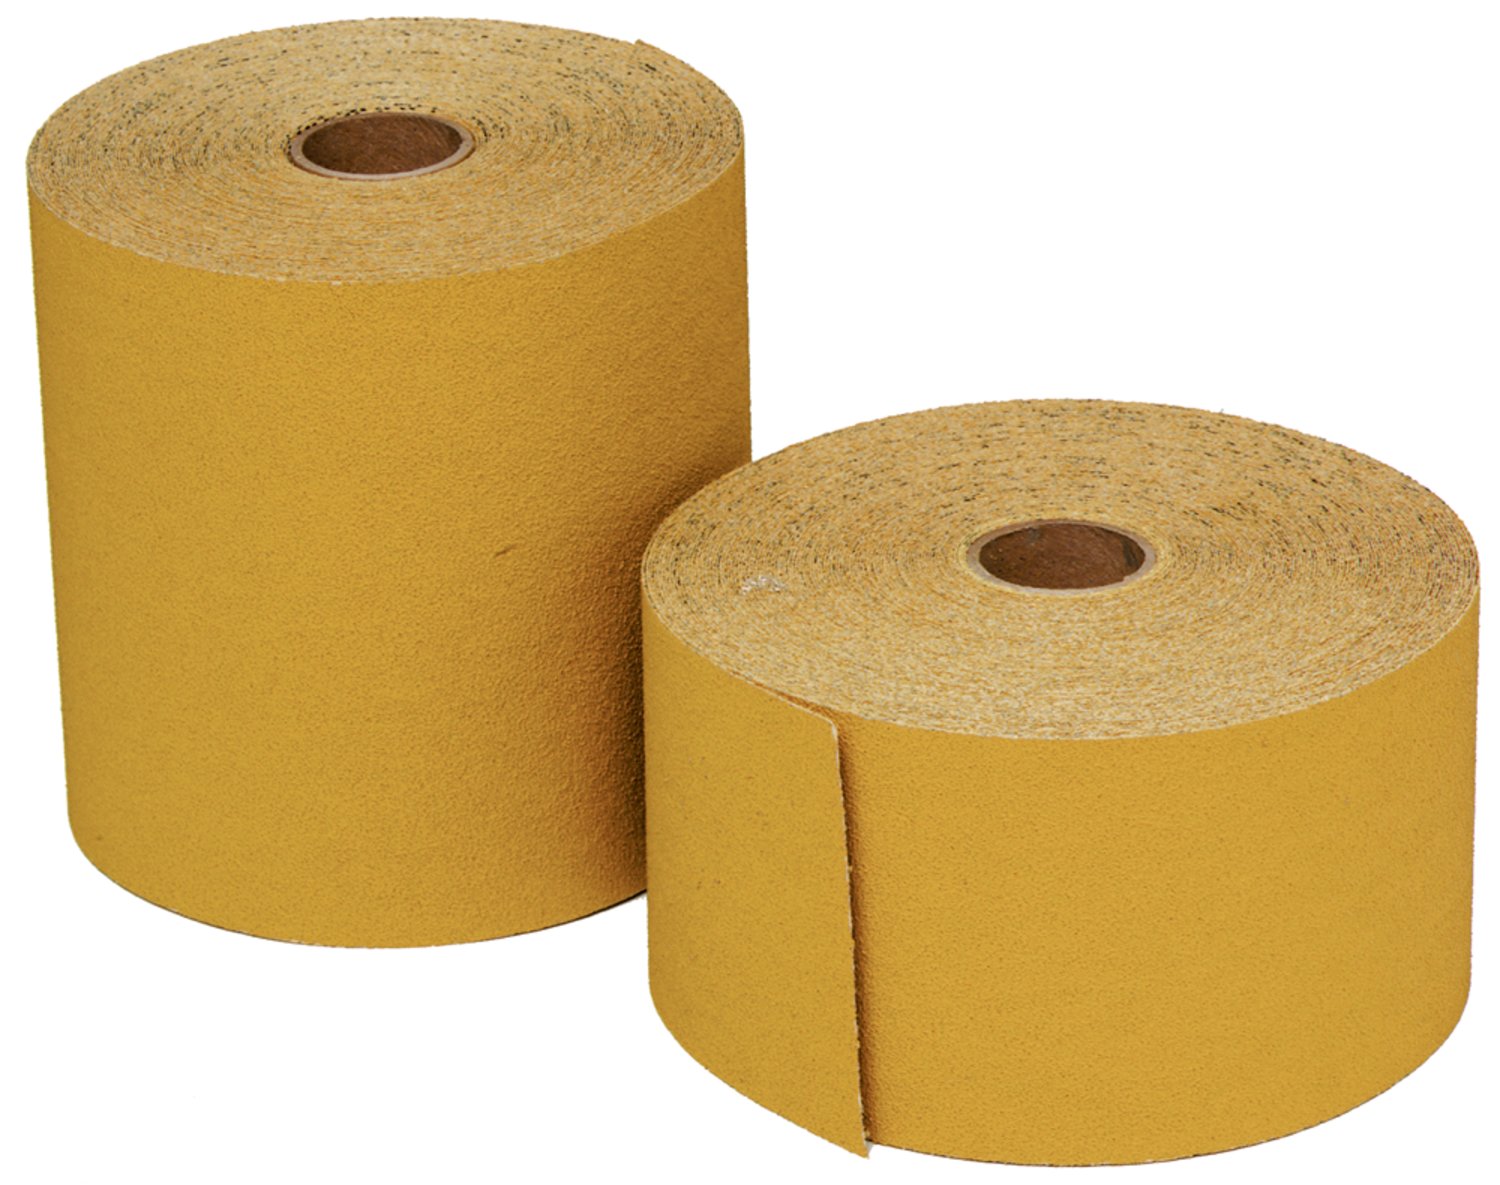 7100093558 - 3M Stikit Gold Paper Roll 216U, P320 A-weight, Config